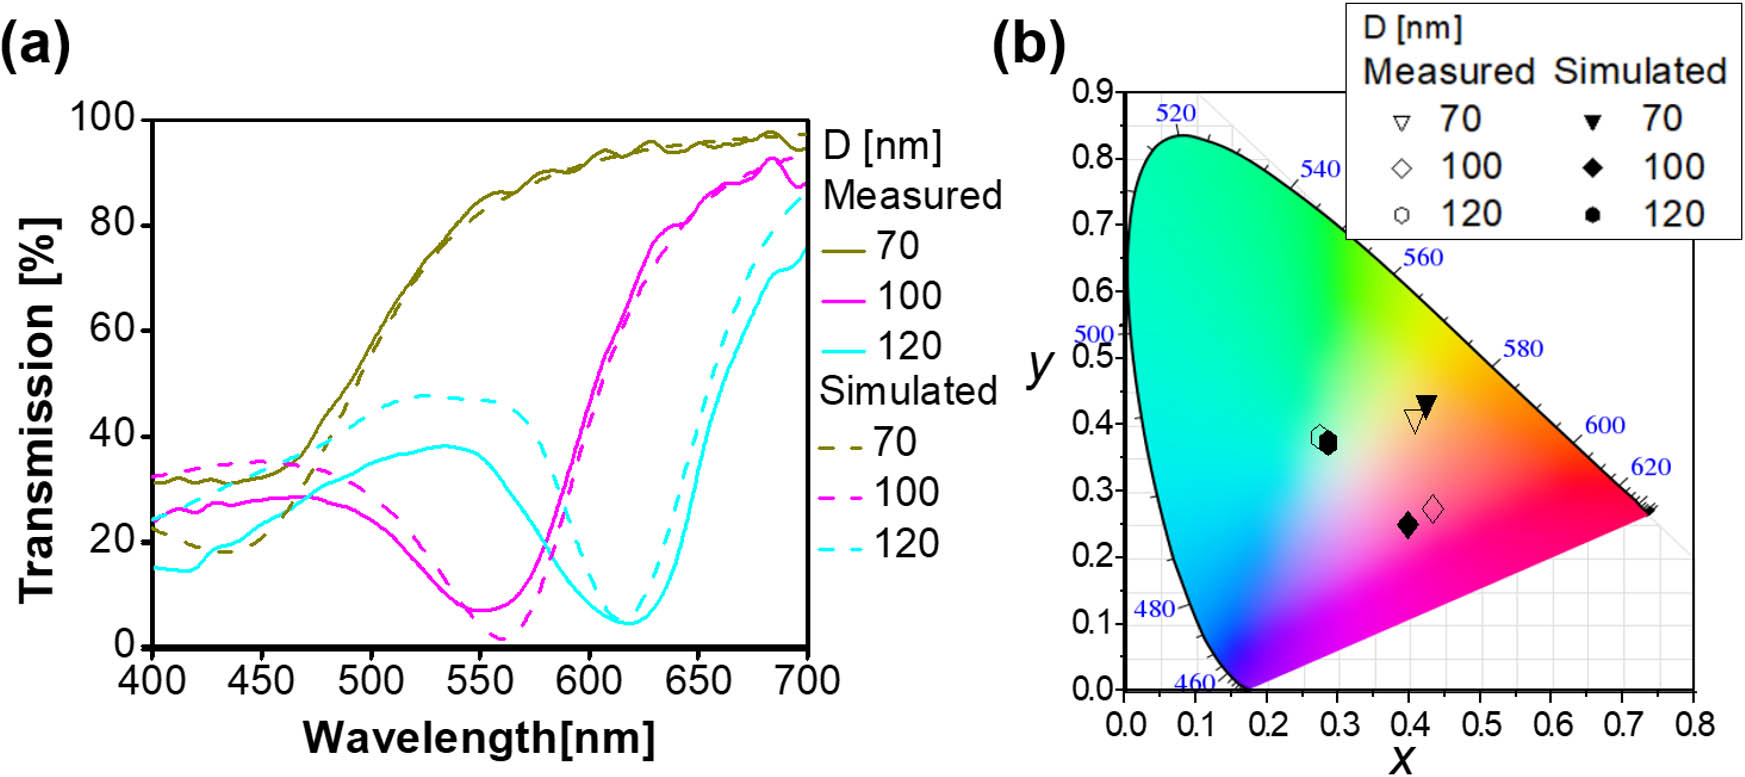 (a) Measured and calculated transmission spectra for the subtractive color filters with diameters of D=70, 100, and 120 nm. (b) Color responses corresponding to the transmission spectra in (a) mapped in the CIE 1931 chromaticity diagram.